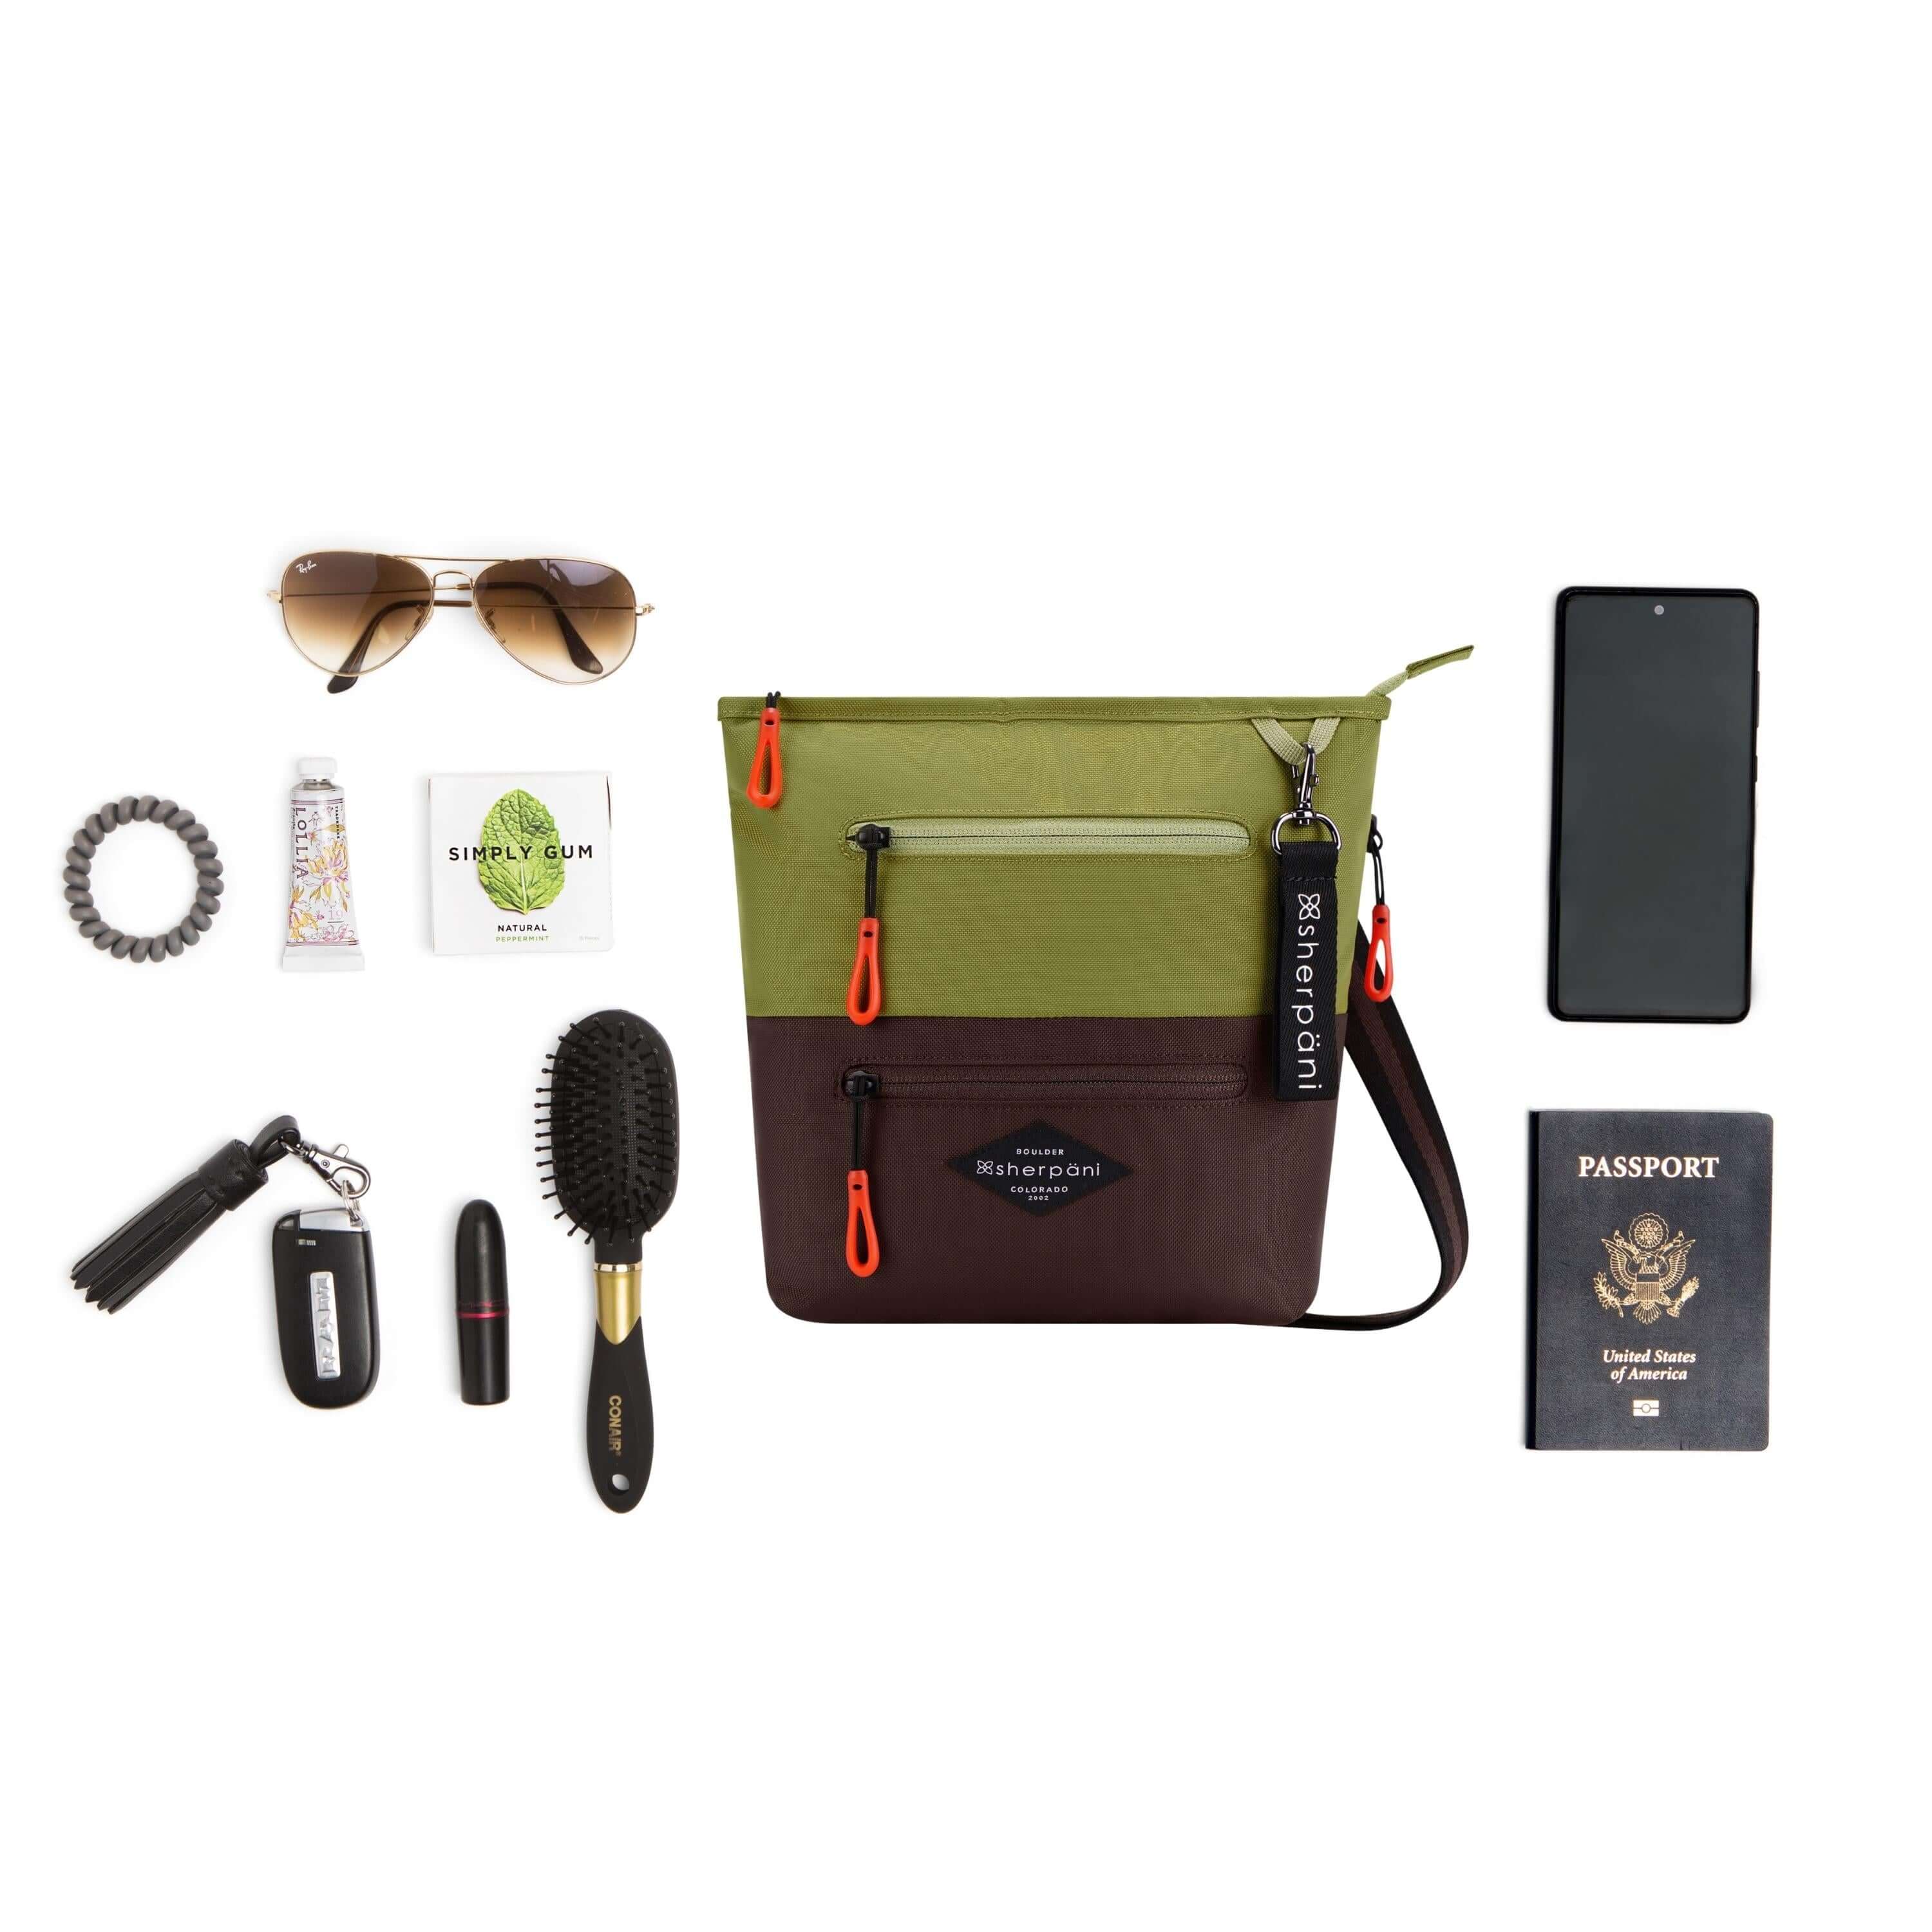 Top view of example items to fill the bag. Sherpani crossbody, the Sadie in Cactus, lies in the center. It is surrounded by an assortment of items: sunglasses, hair tie, hand lotion, gum, car key, lipstick, hair brush, phone and passport. 